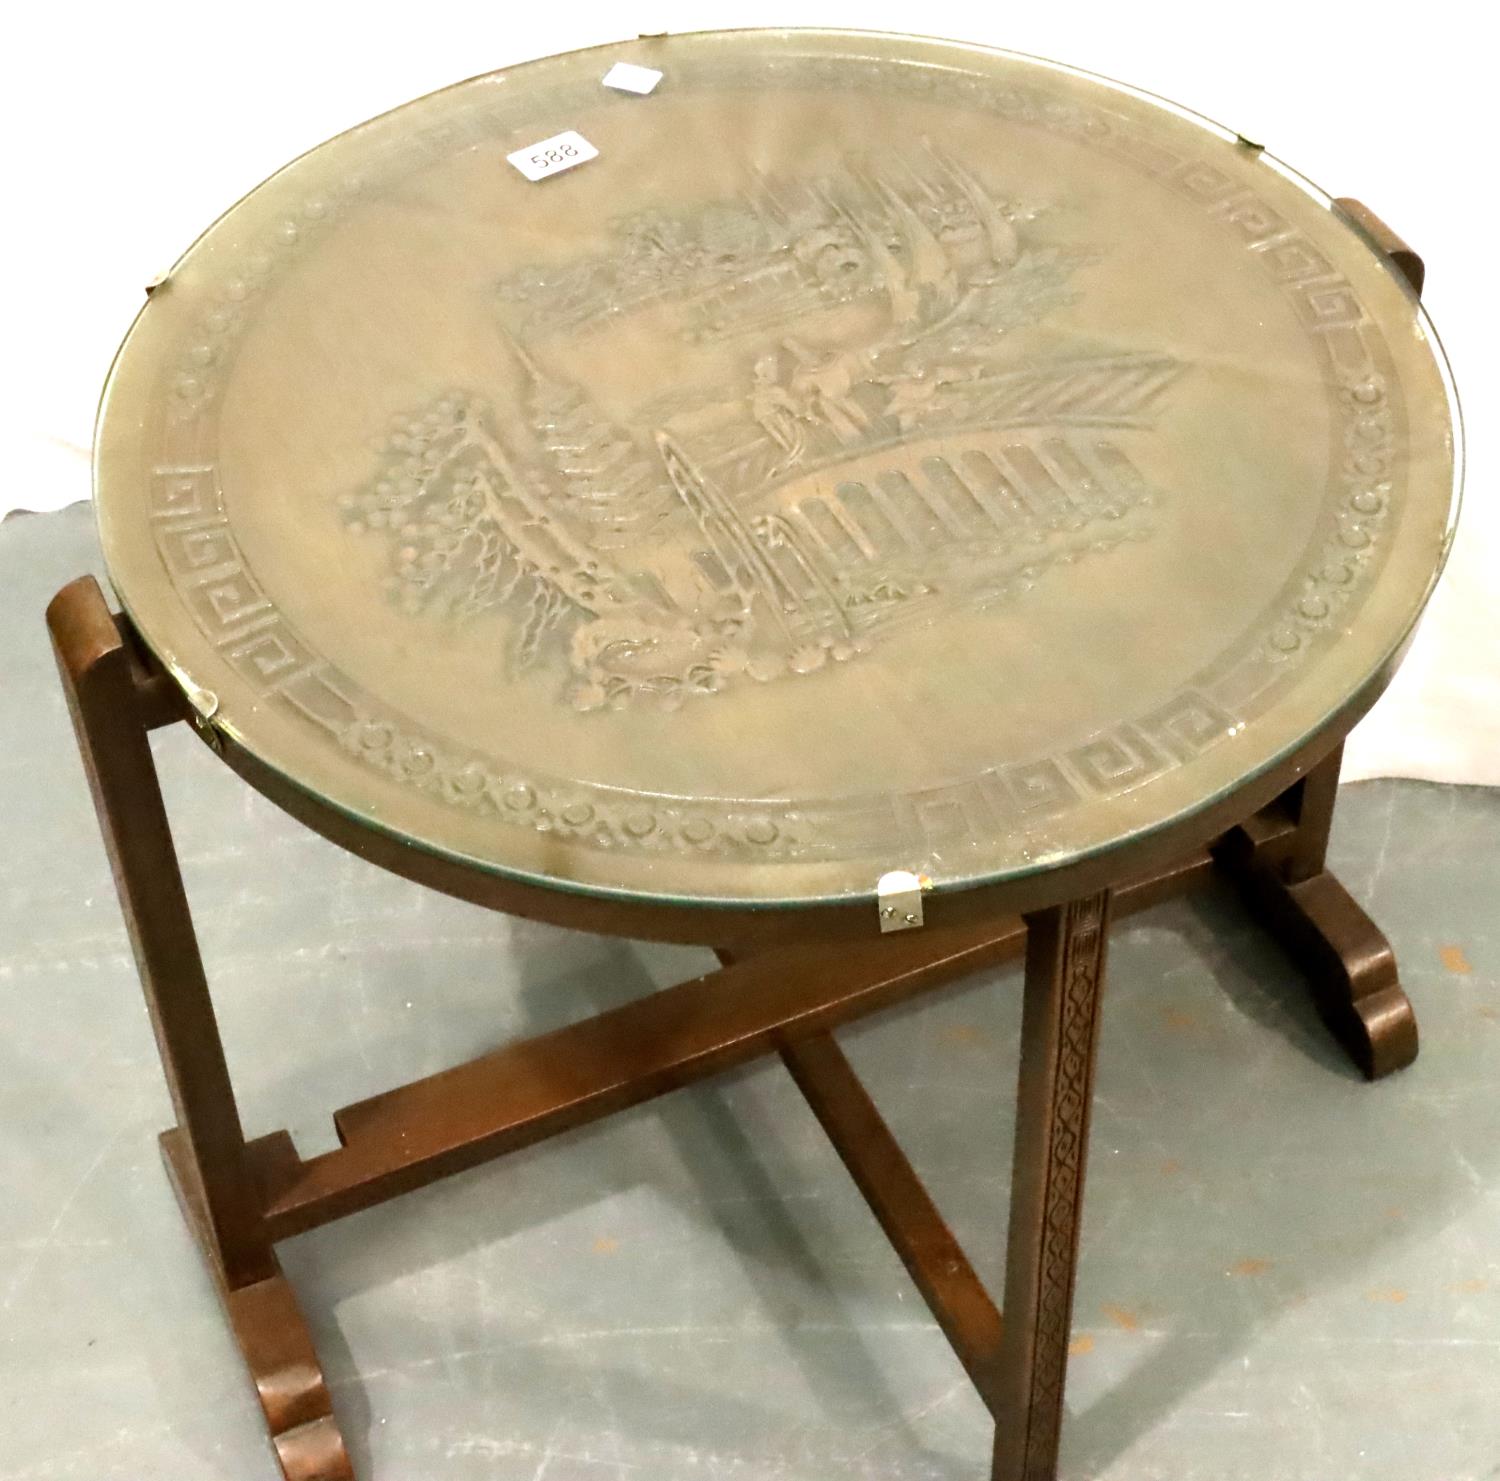 Circular folding Oriental hardwood occasional table with glass top, D: 62 cm, H: 52 cm. Not